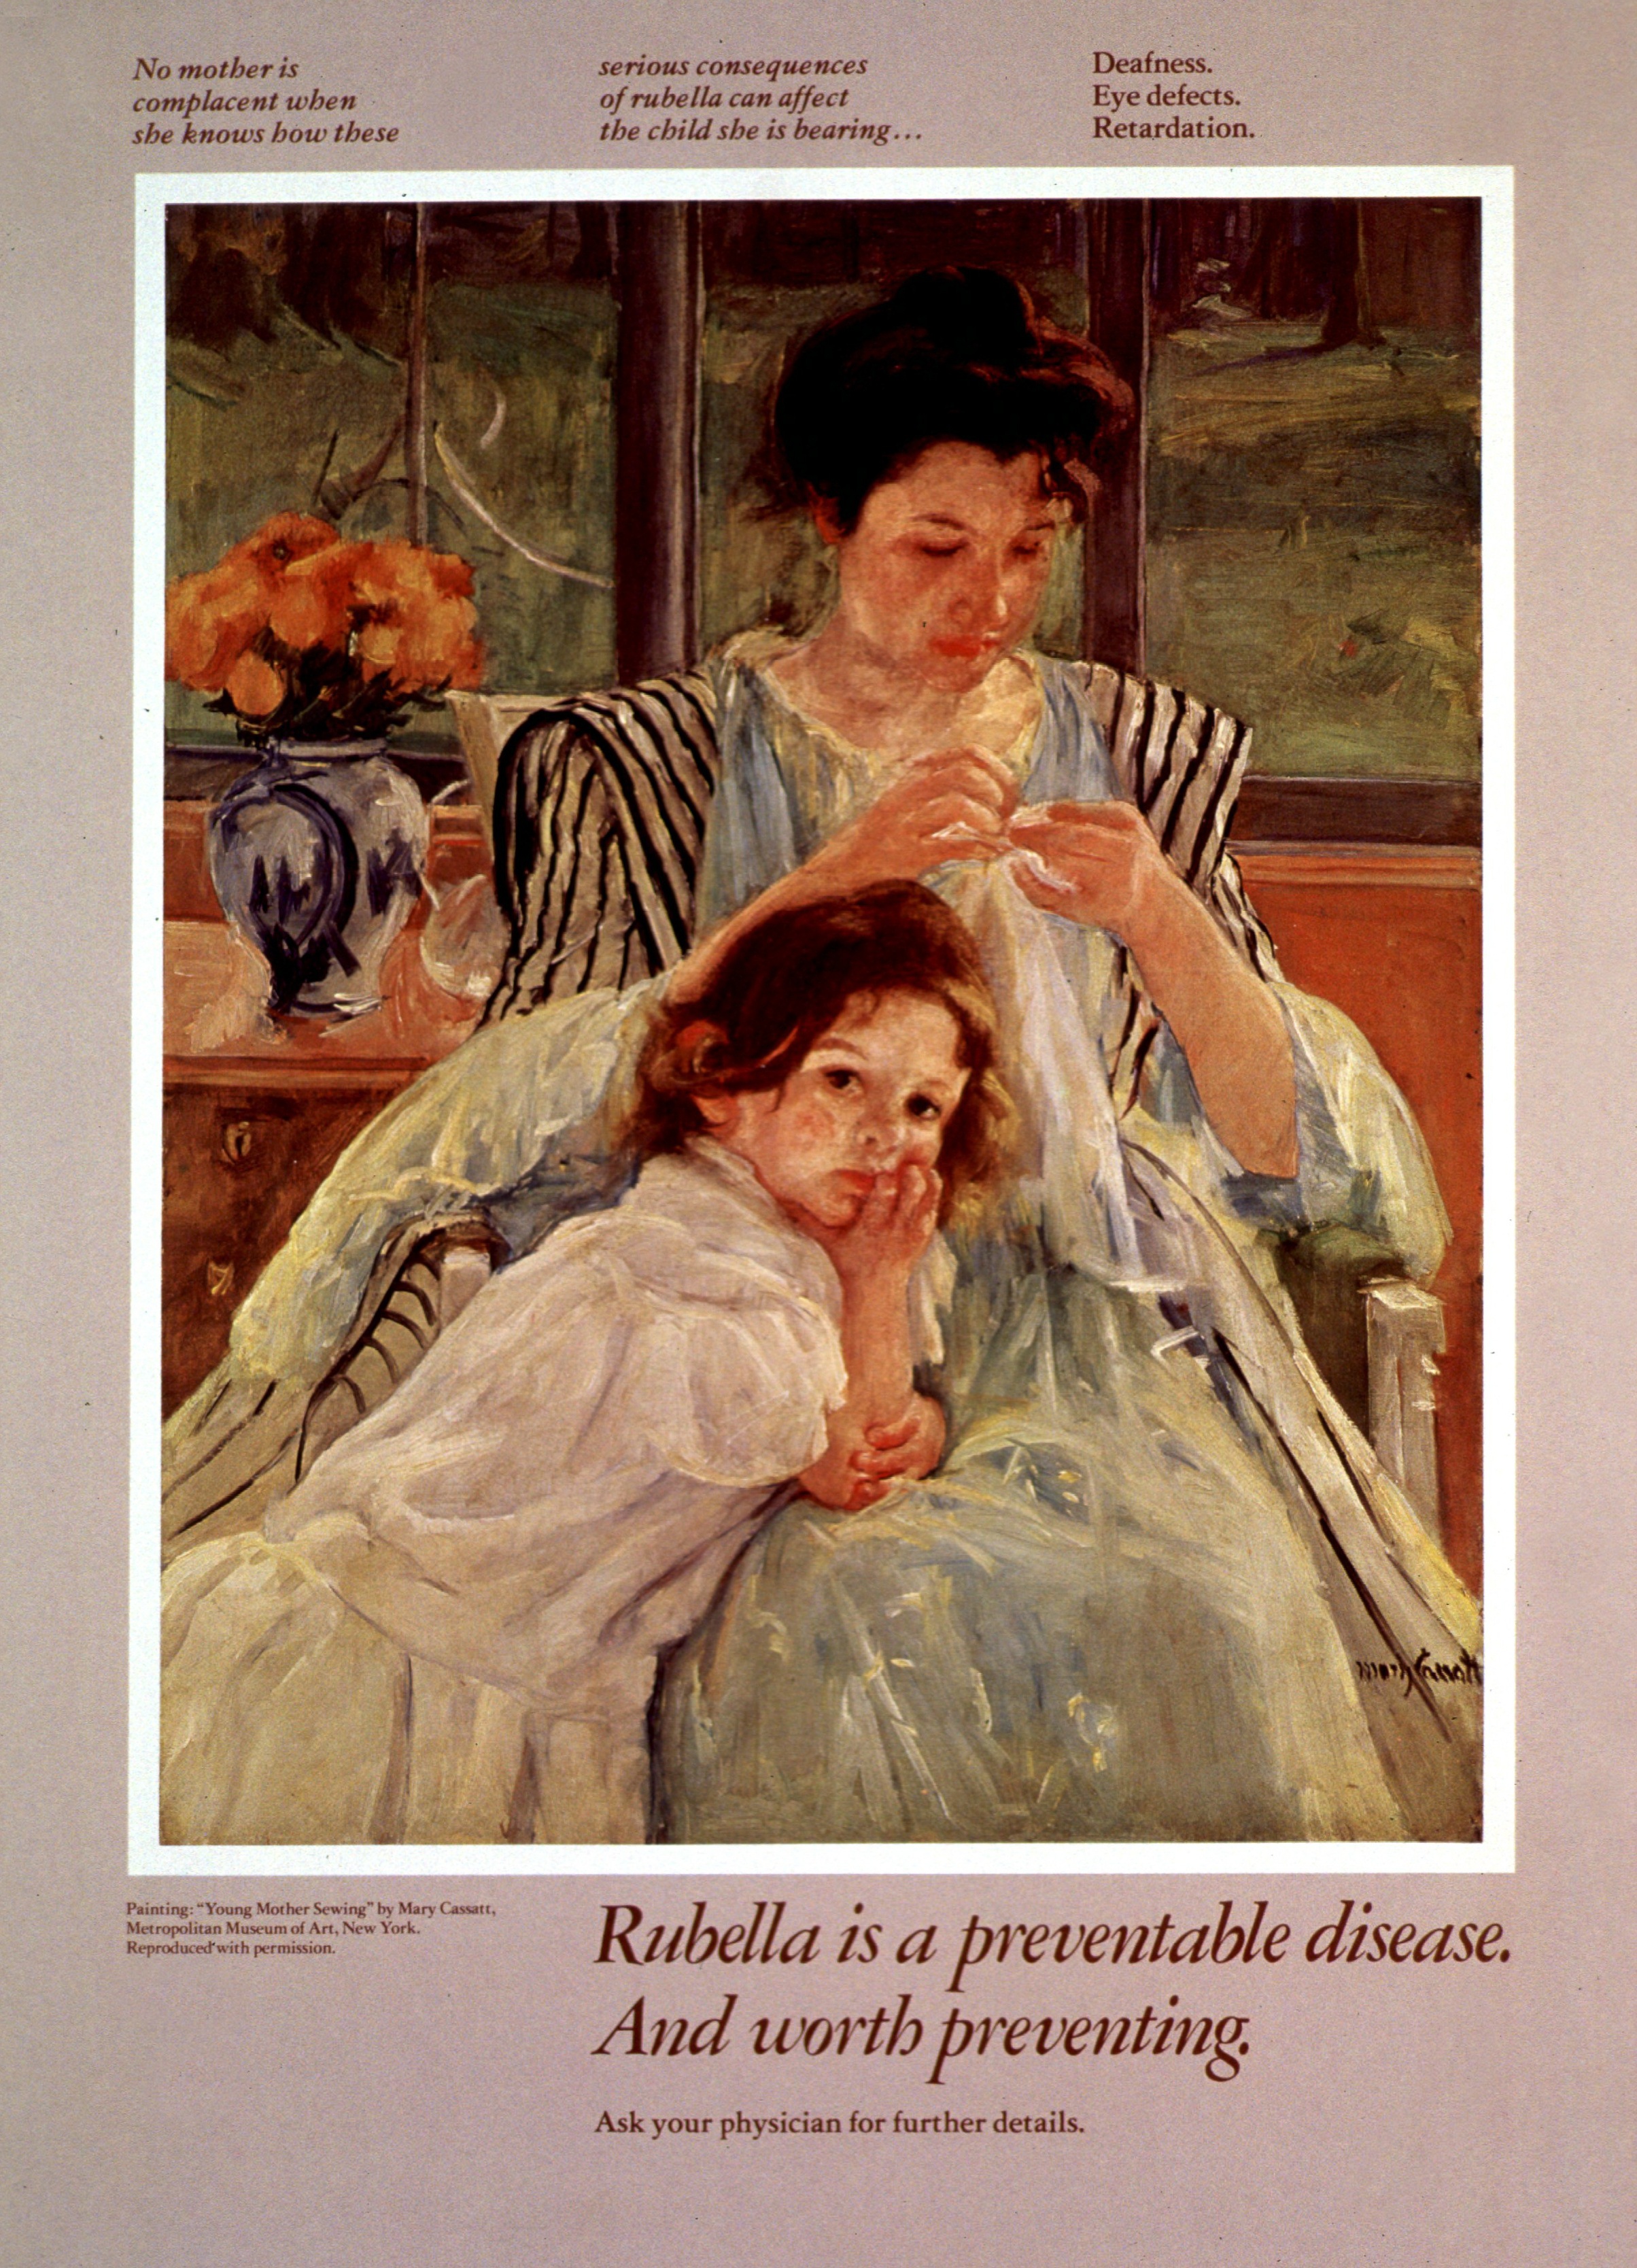 An image of  a Mary Cassatt painting with a motherly looking figure in a chair with a young girl leaning on her in an indoor setting reads Rubella is a preventable disease. And worth preventing. ask your physician for further details.